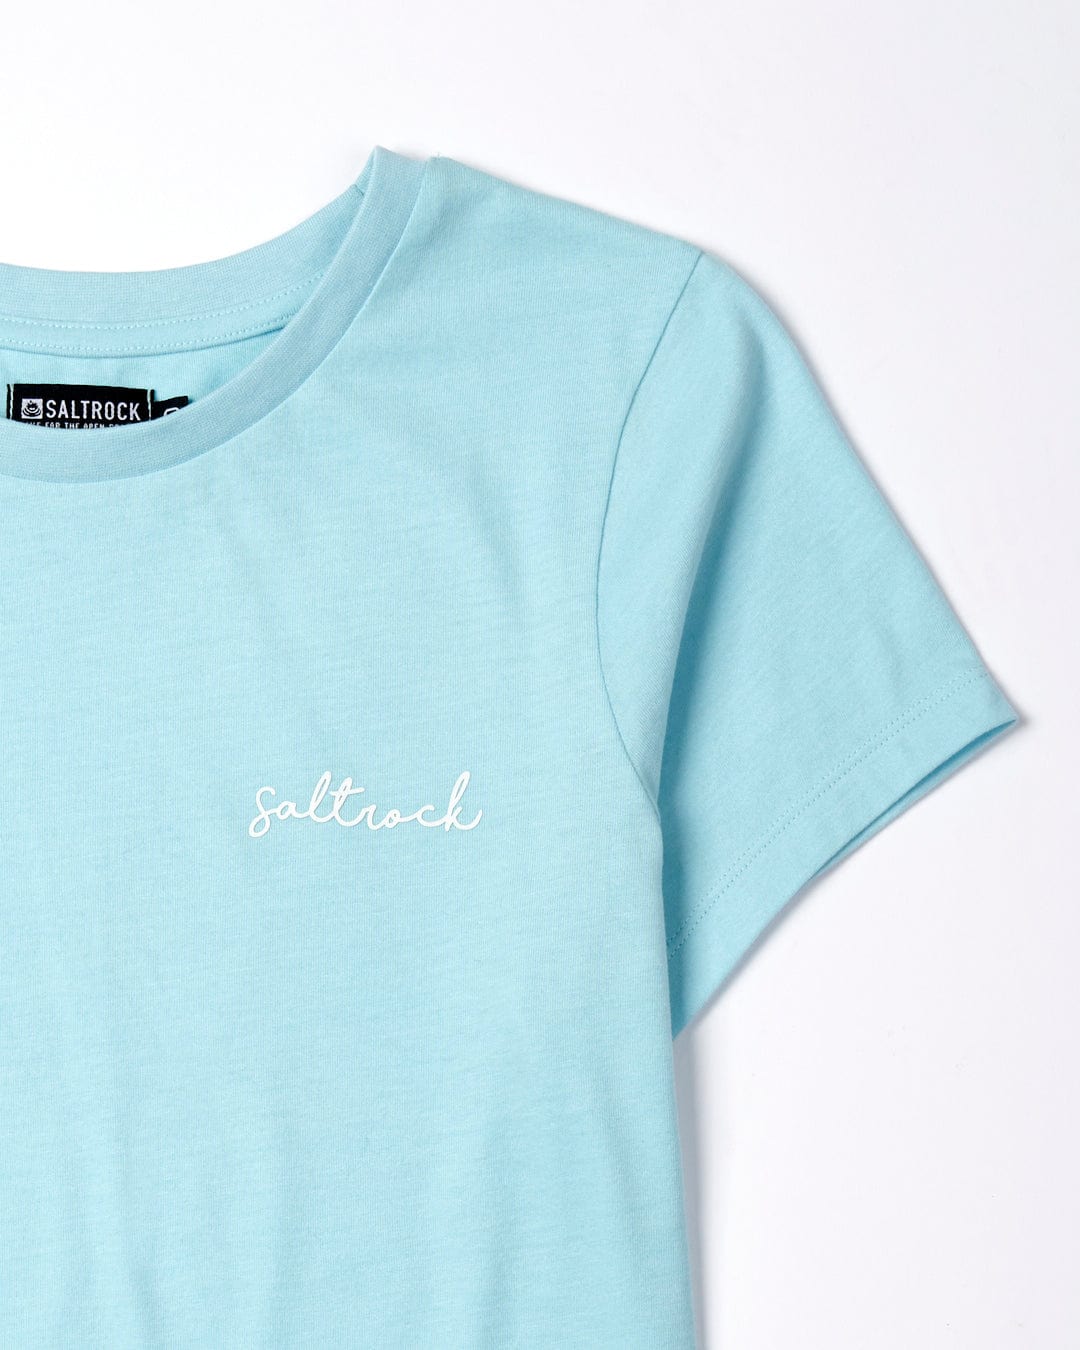 Velator - Womens Short Sleeve T-Shirt - Light Blue with the word "Saltrock" written in small script on the chest, displayed on a white background.